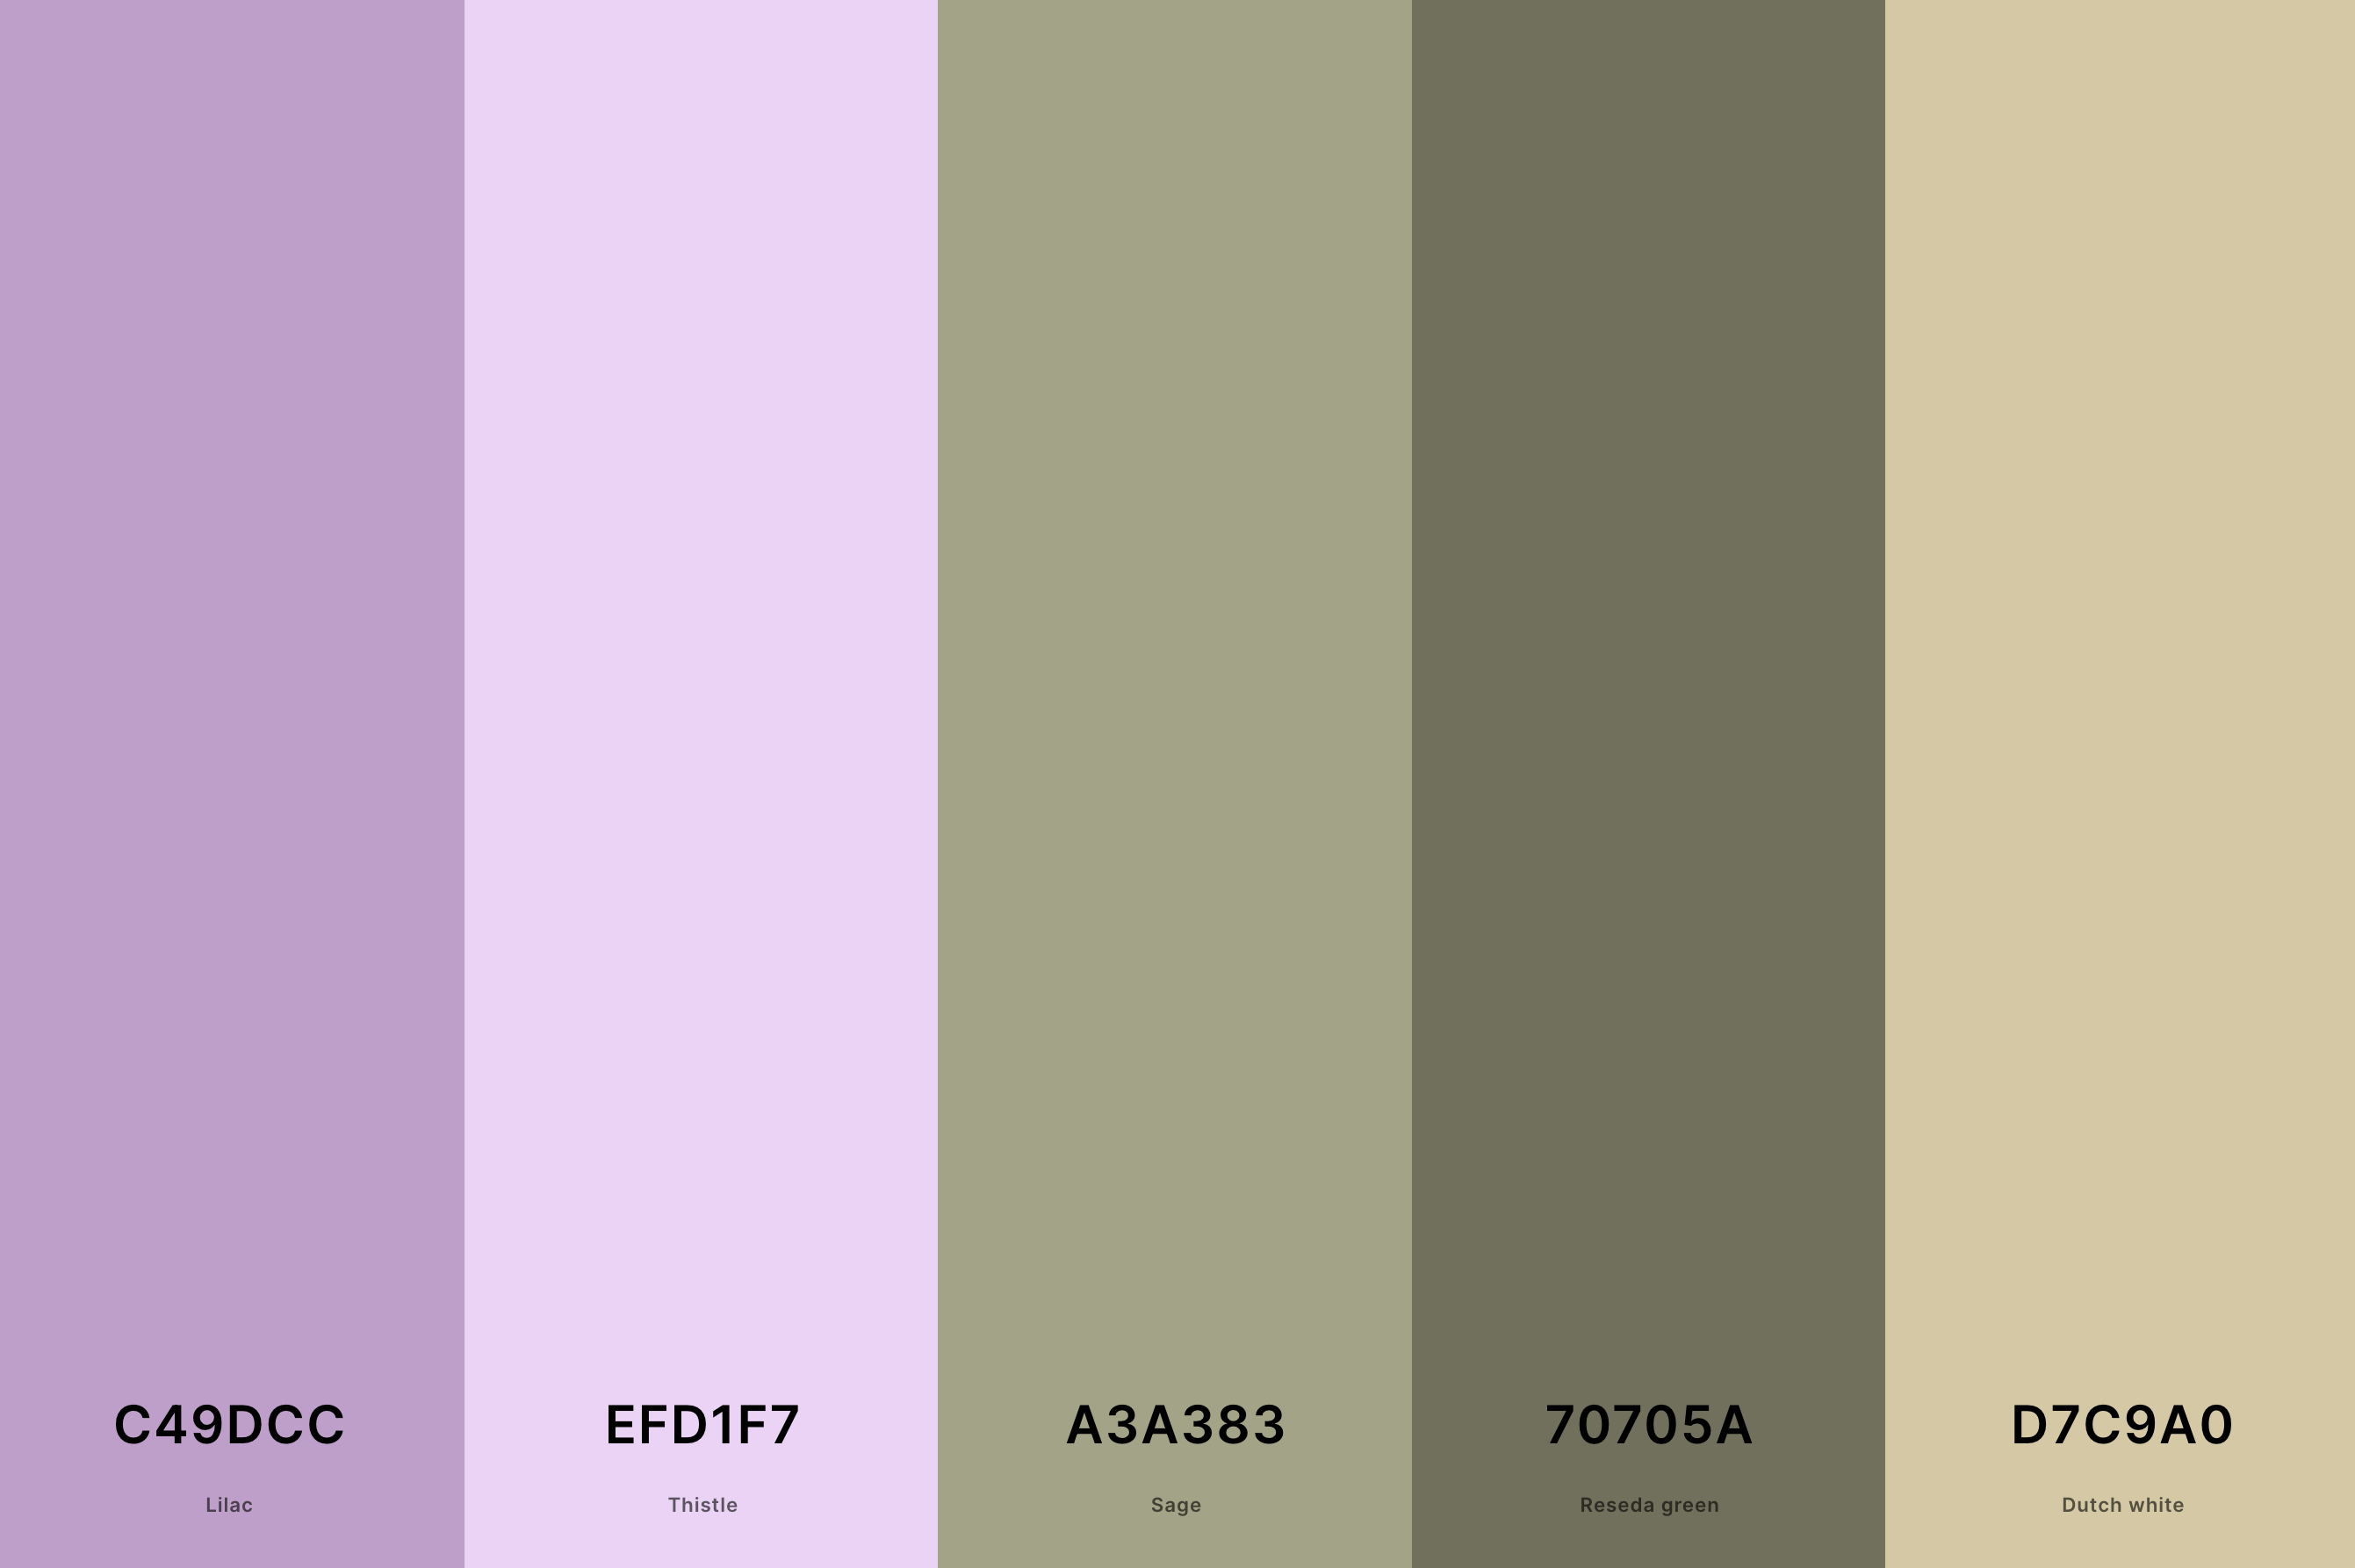 24. Tan And Sage Green Color Palette Color Palette with Lilac (Hex #C49DCC) + Thistle (Hex #EFD1F7) + Sage (Hex #A3A383) + Reseda Green (Hex #70705A) + Dutch White (Hex #D7C9A0) Color Palette with Hex Codes